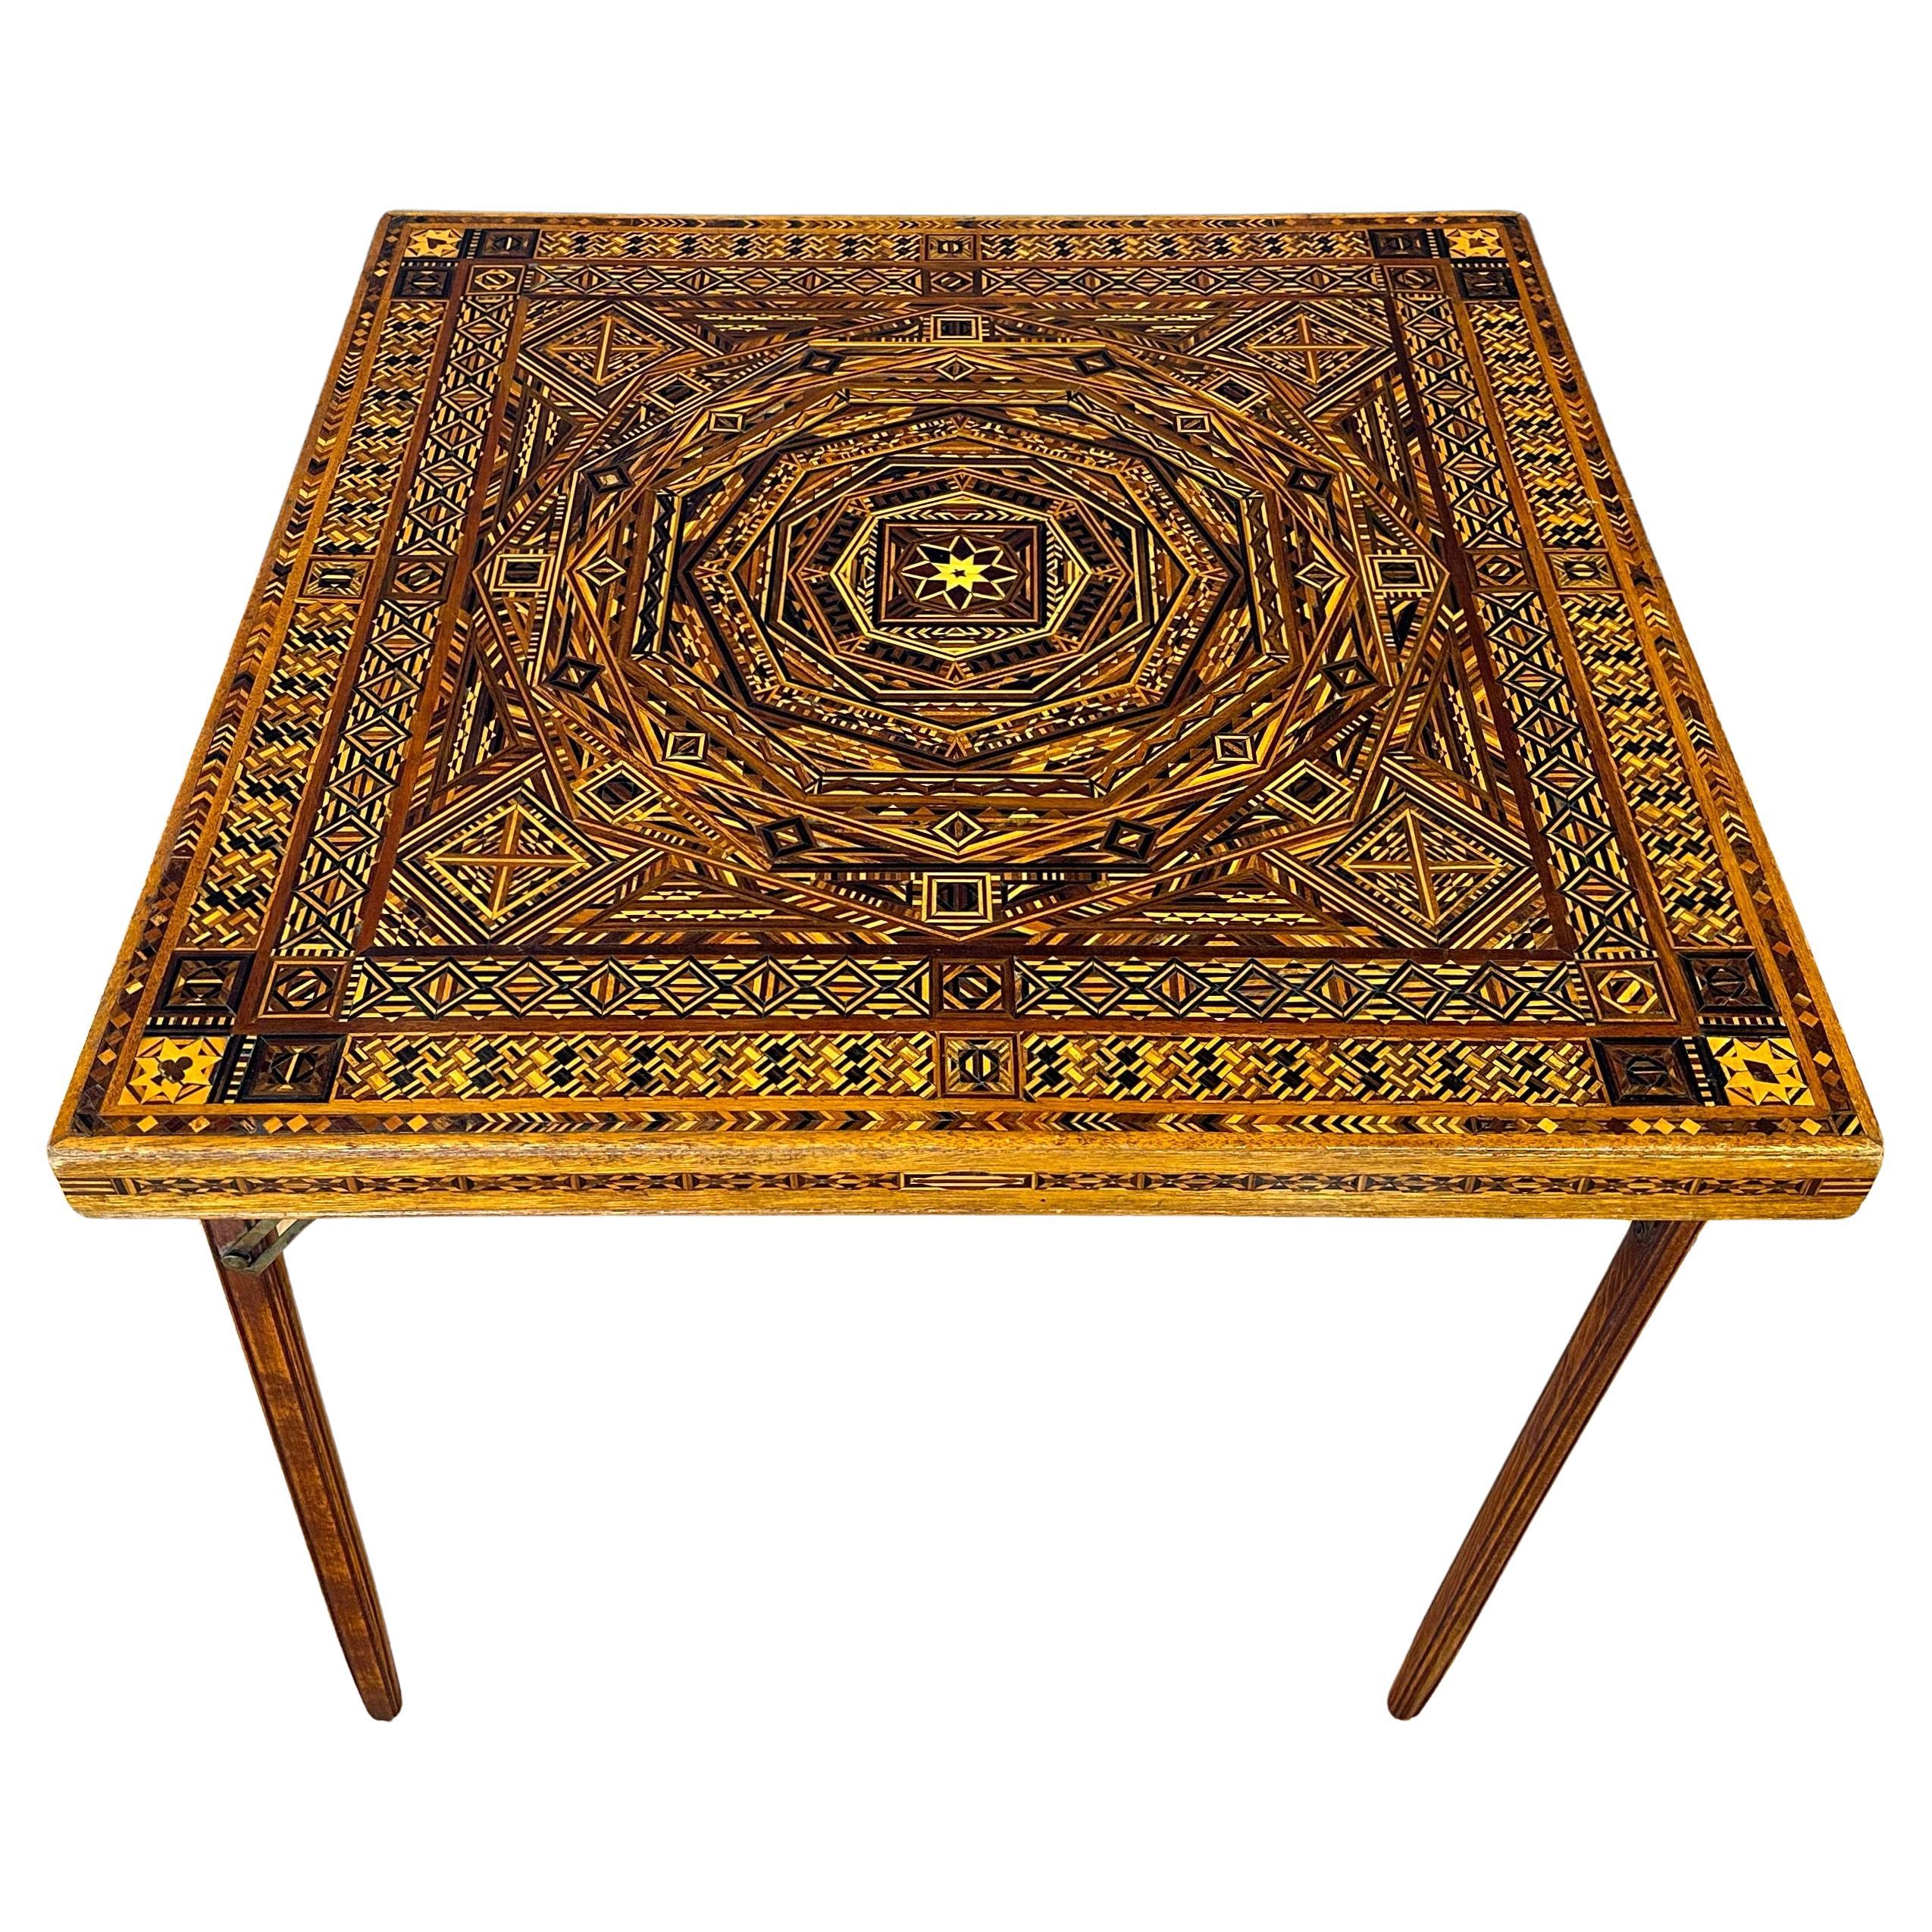 Syrian-Style Exceptionally Intricate Wood Marquetry Folding Card Table, 1930s